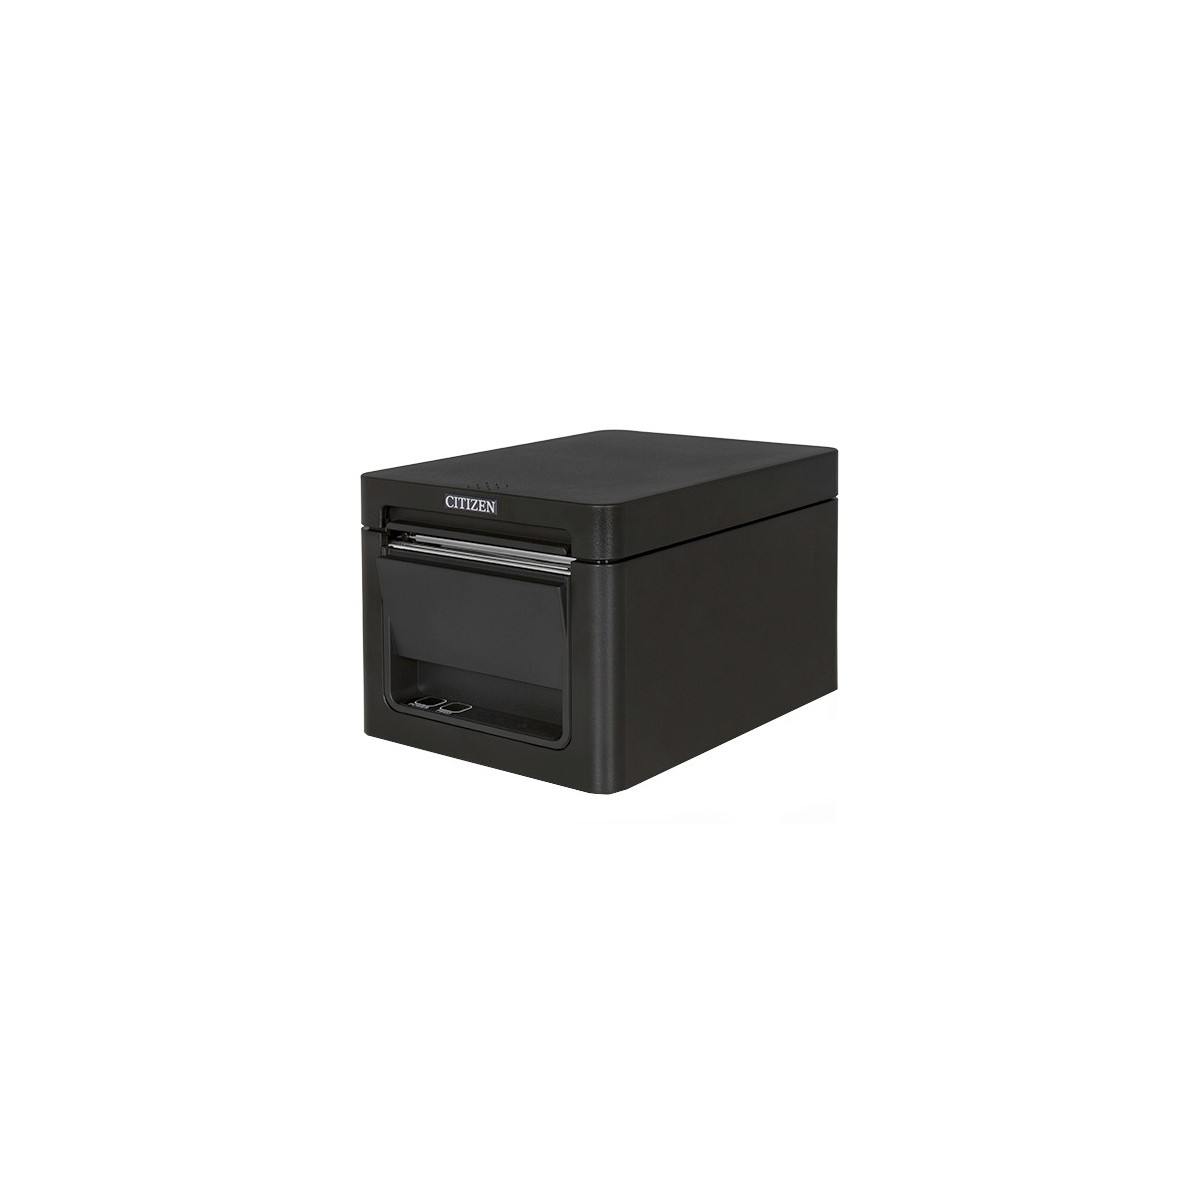 Citizen CT-E351 - Direct thermal - POS printer - 203 x 203 DPI - 250 mm/sec - 58 - 80 mm - Wired